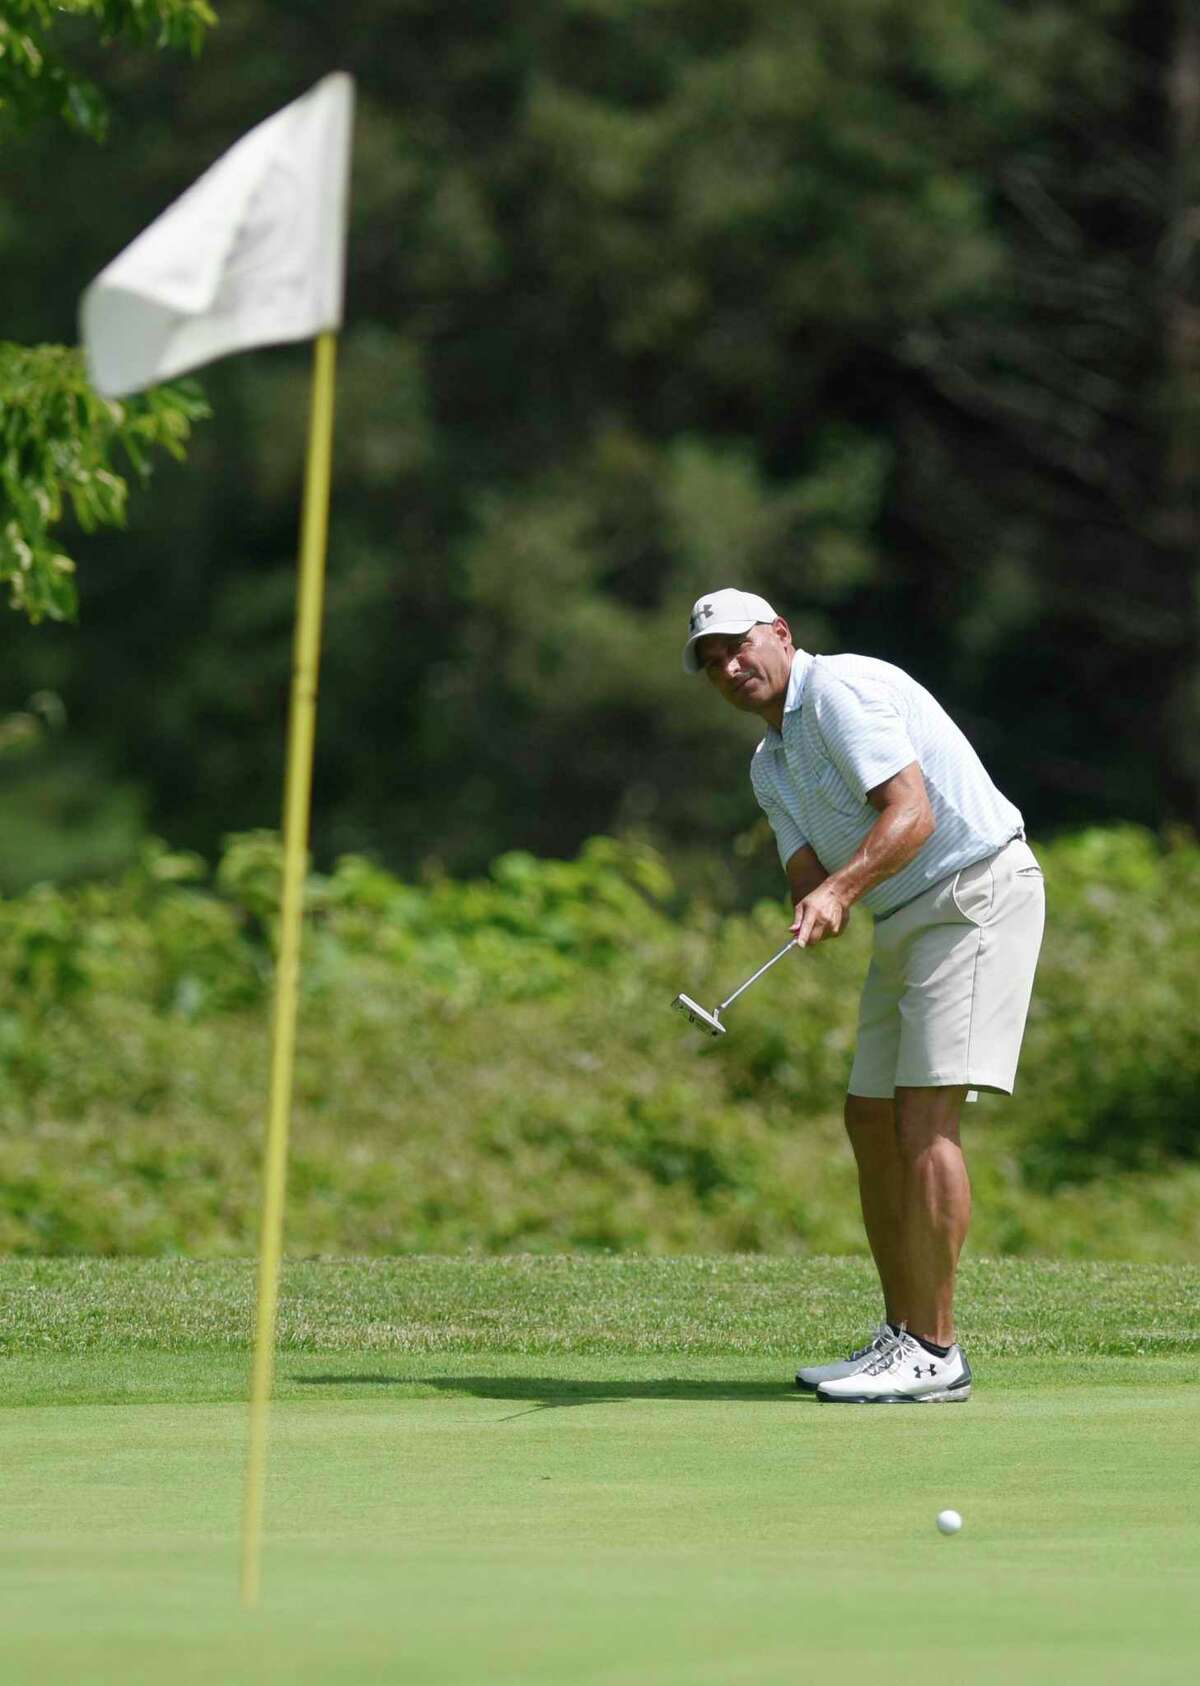 Joe Nethercott putts in the 76th Annual Town Wide Men's Golf Tournament at Griffith E. Harris Golf Course in Greenwich, Conn. Sunday, June 27, 2021. Nethercott won the Senior title.